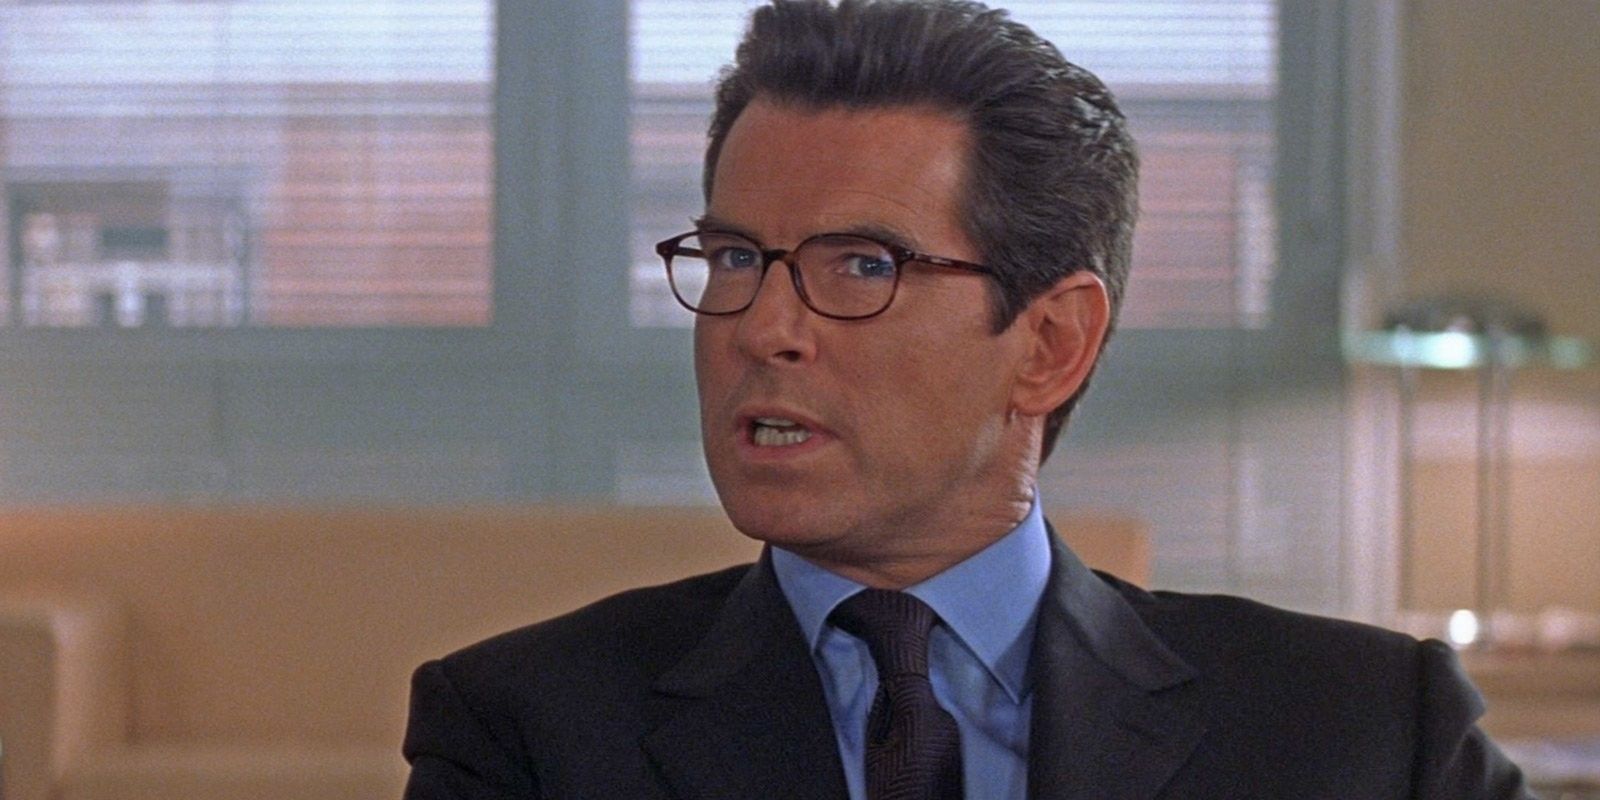 11 James Bond Devices From Pierce Brosnan's Films Ranked - techgun.in